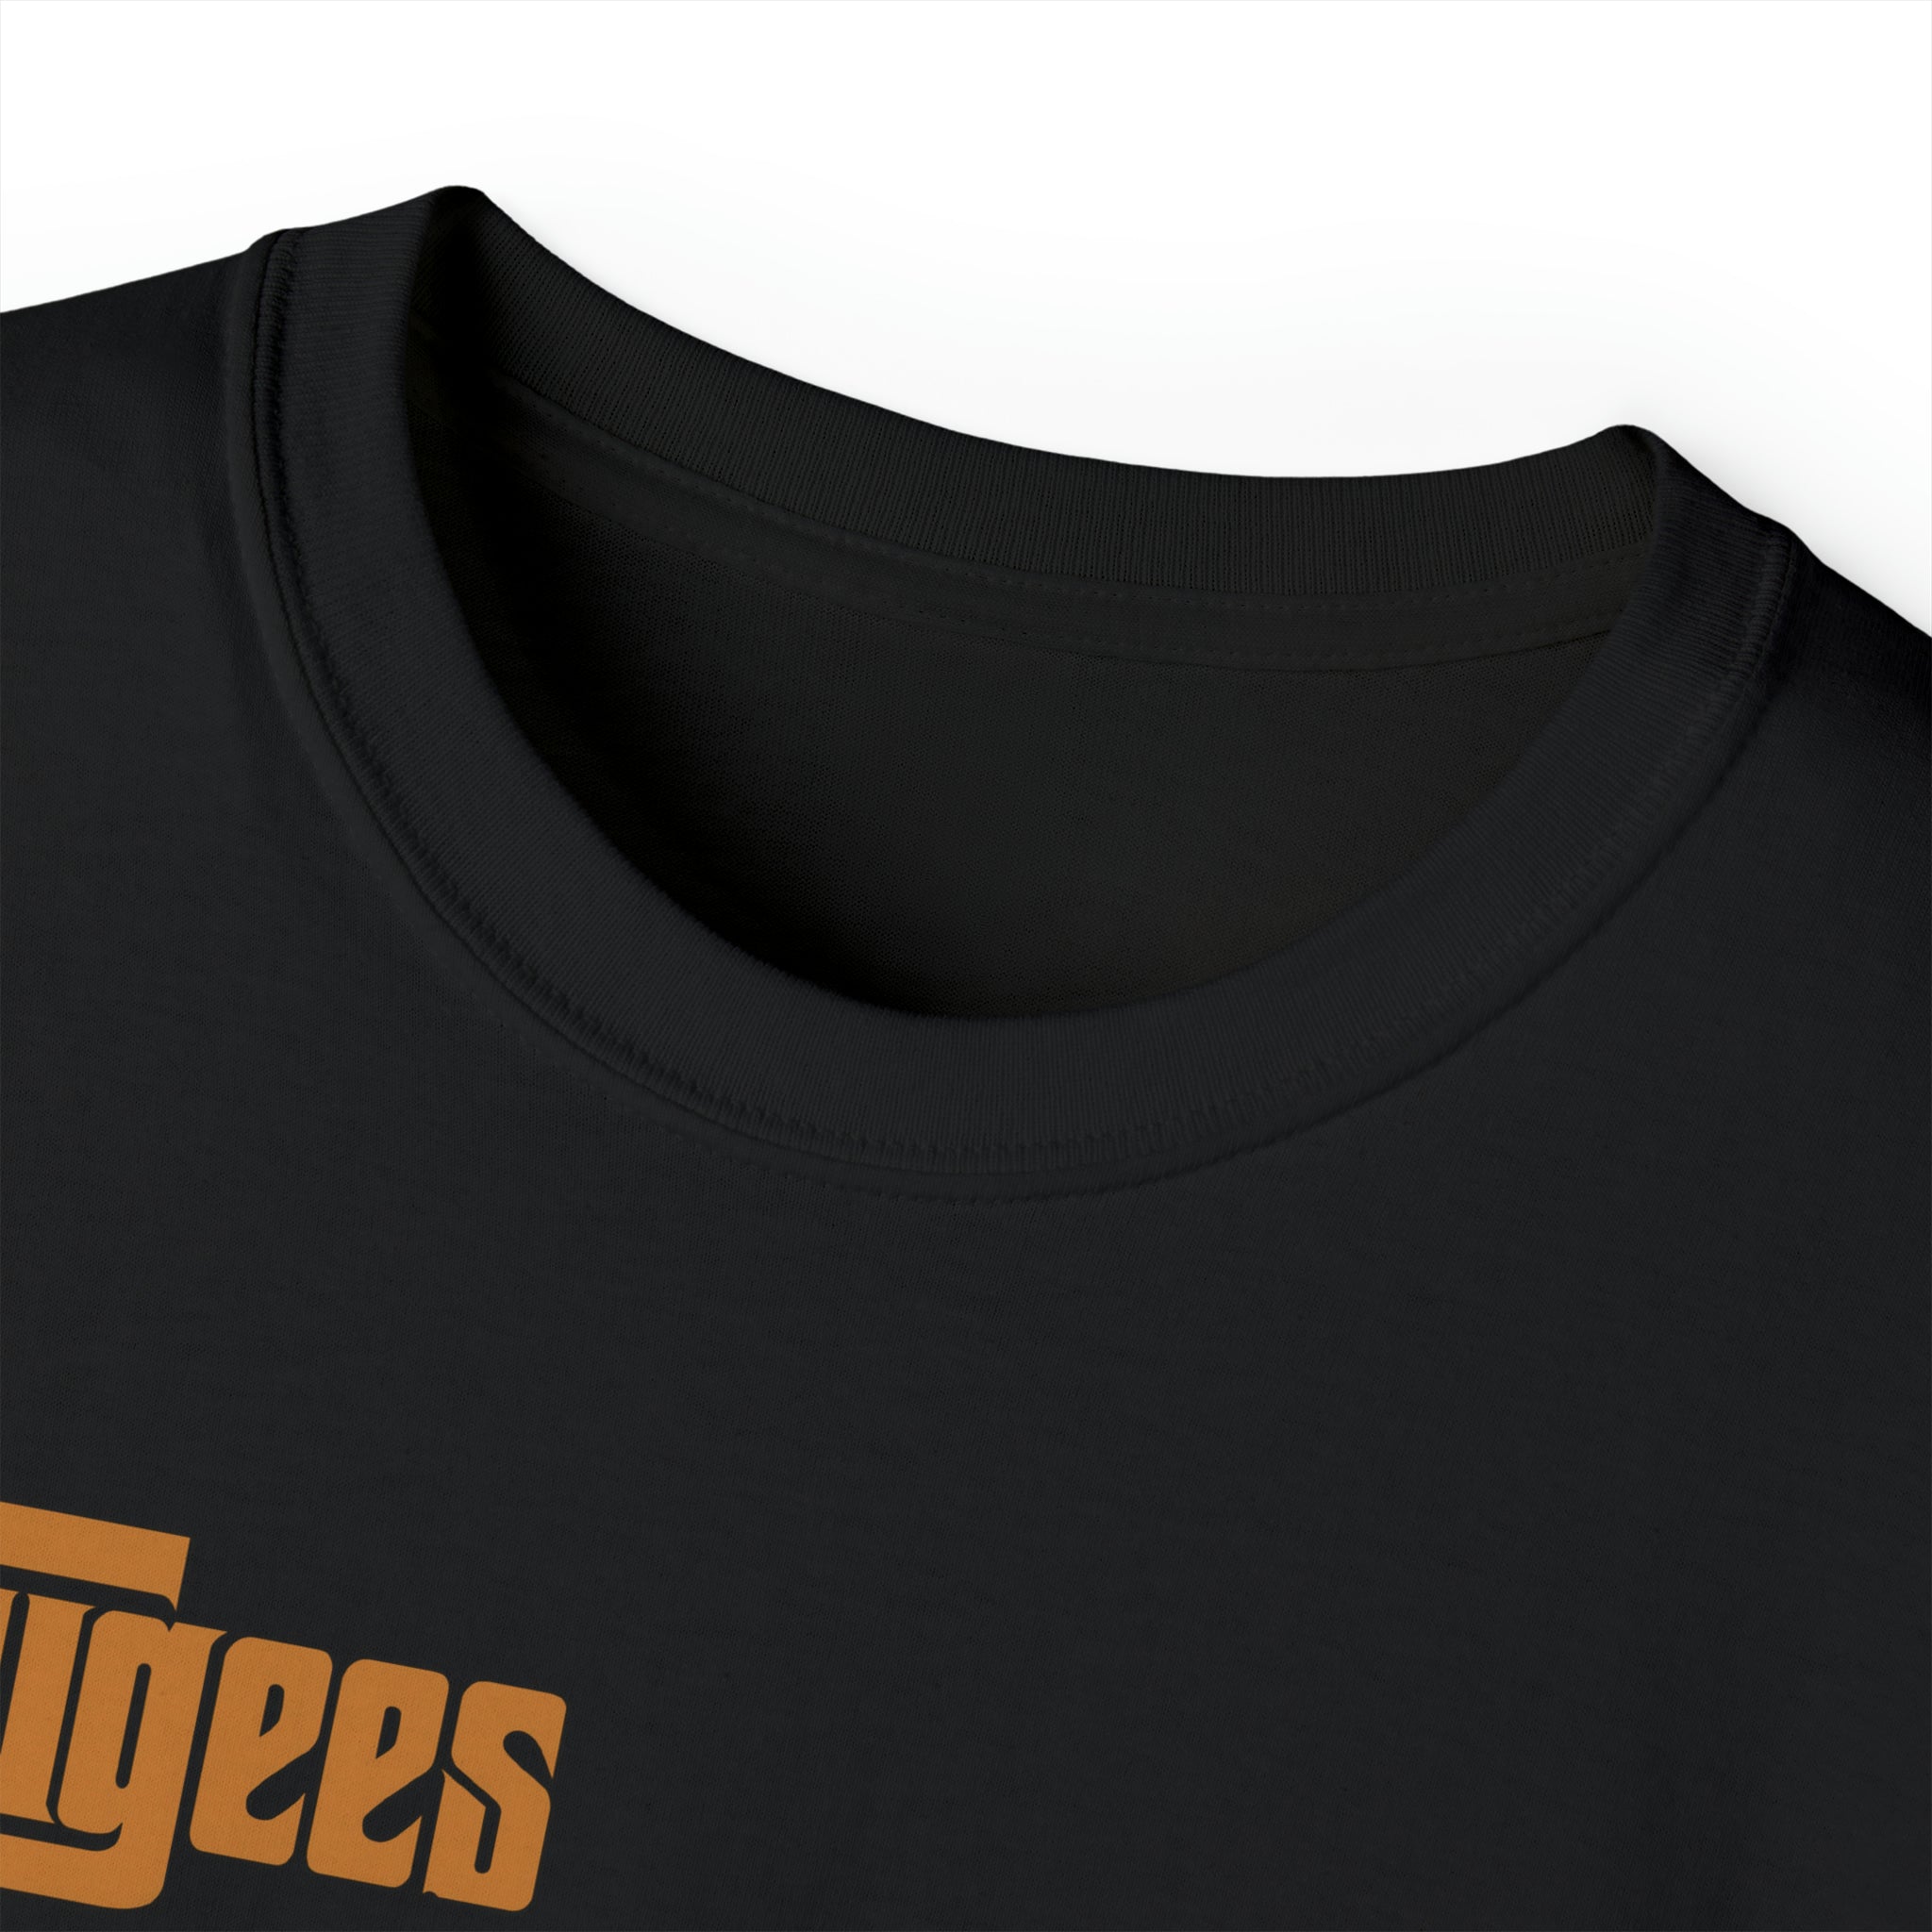 Fugees 'The Score' 90s Hip Hop Tee - Lauryn Hill